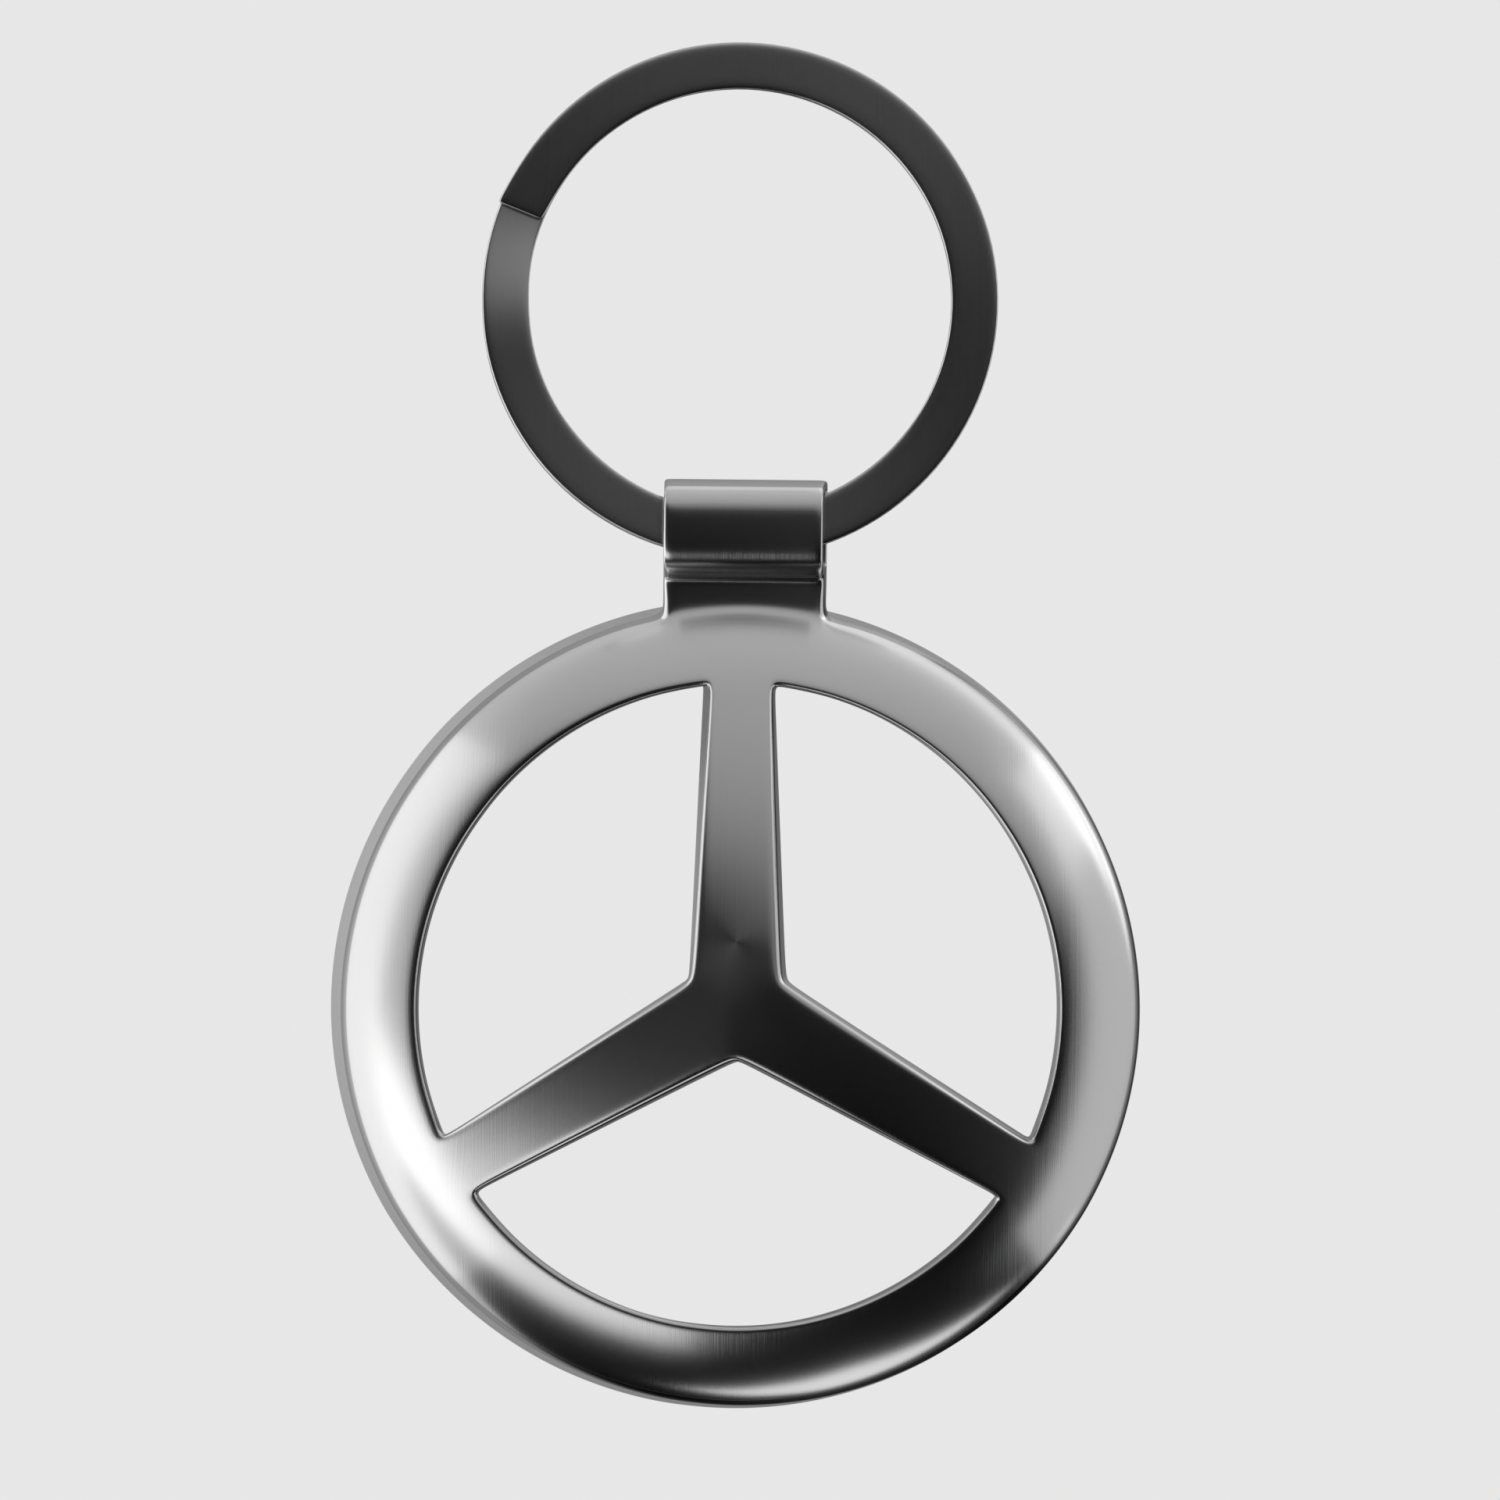 Tukellen for Mercedes Benz Key fob Cover with India | Ubuy